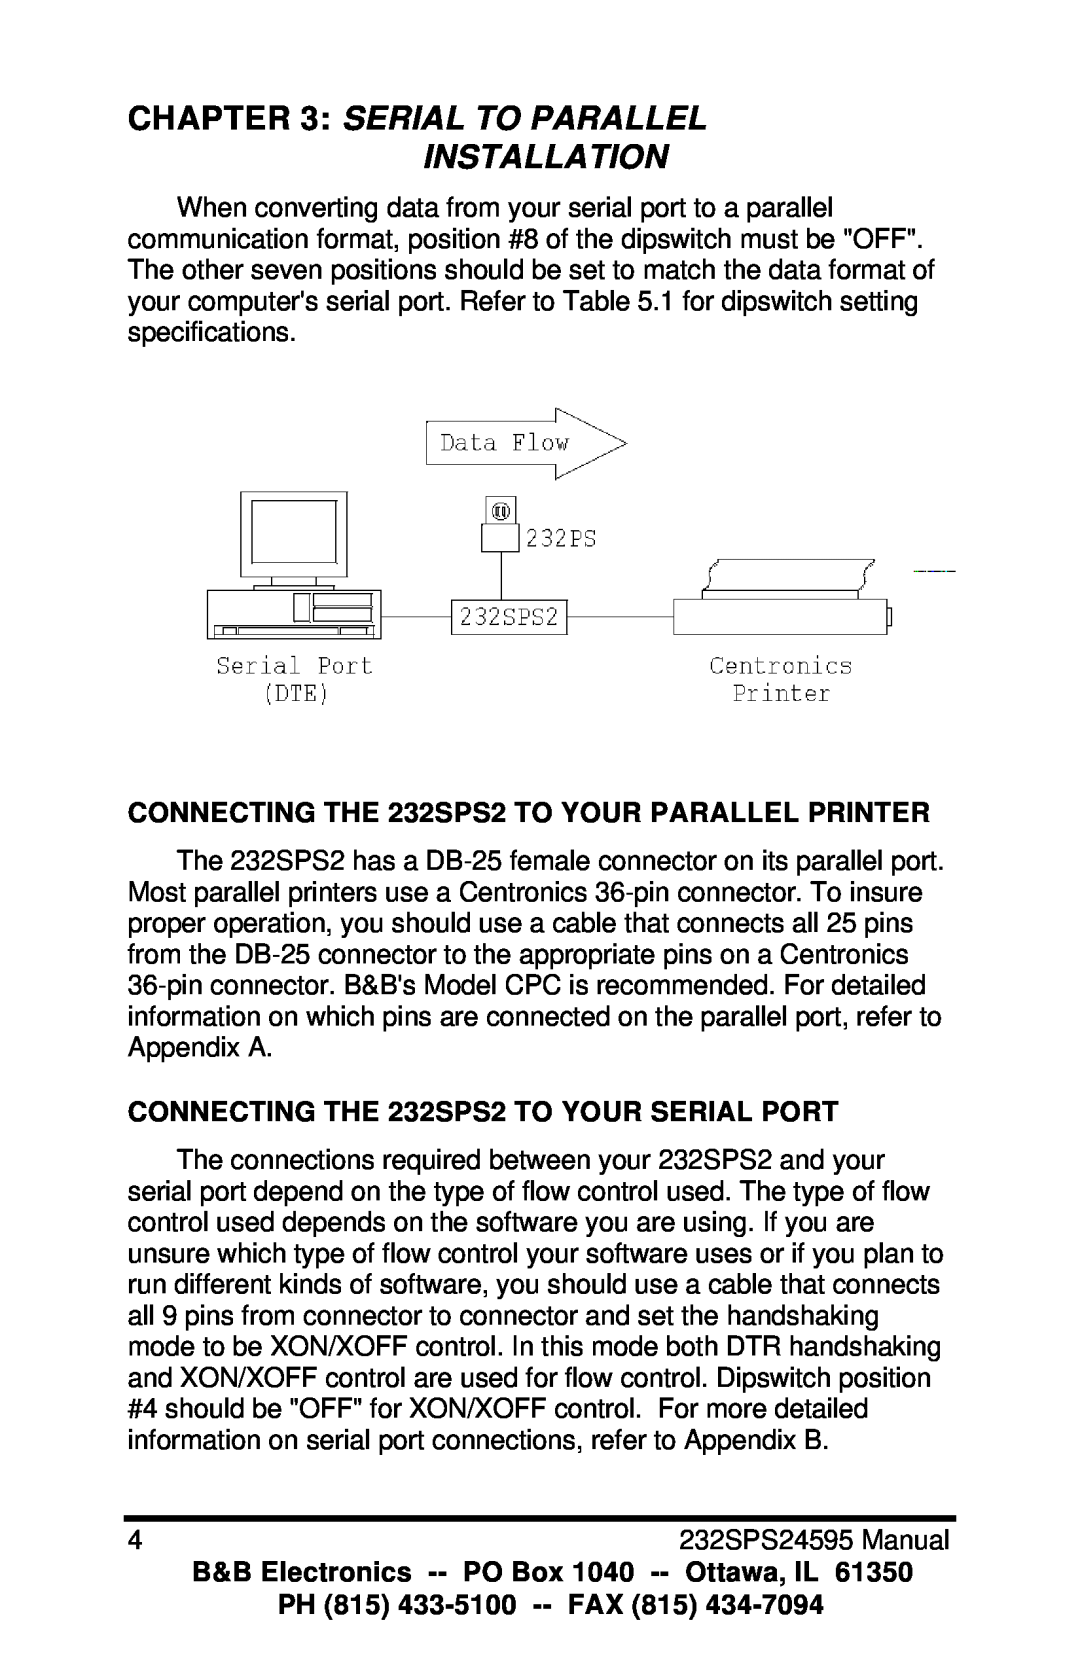 B&B Electronics manual Serial To Parallel Installation, CONNECTING THE 232SPS2 TO YOUR PARALLEL PRINTER 